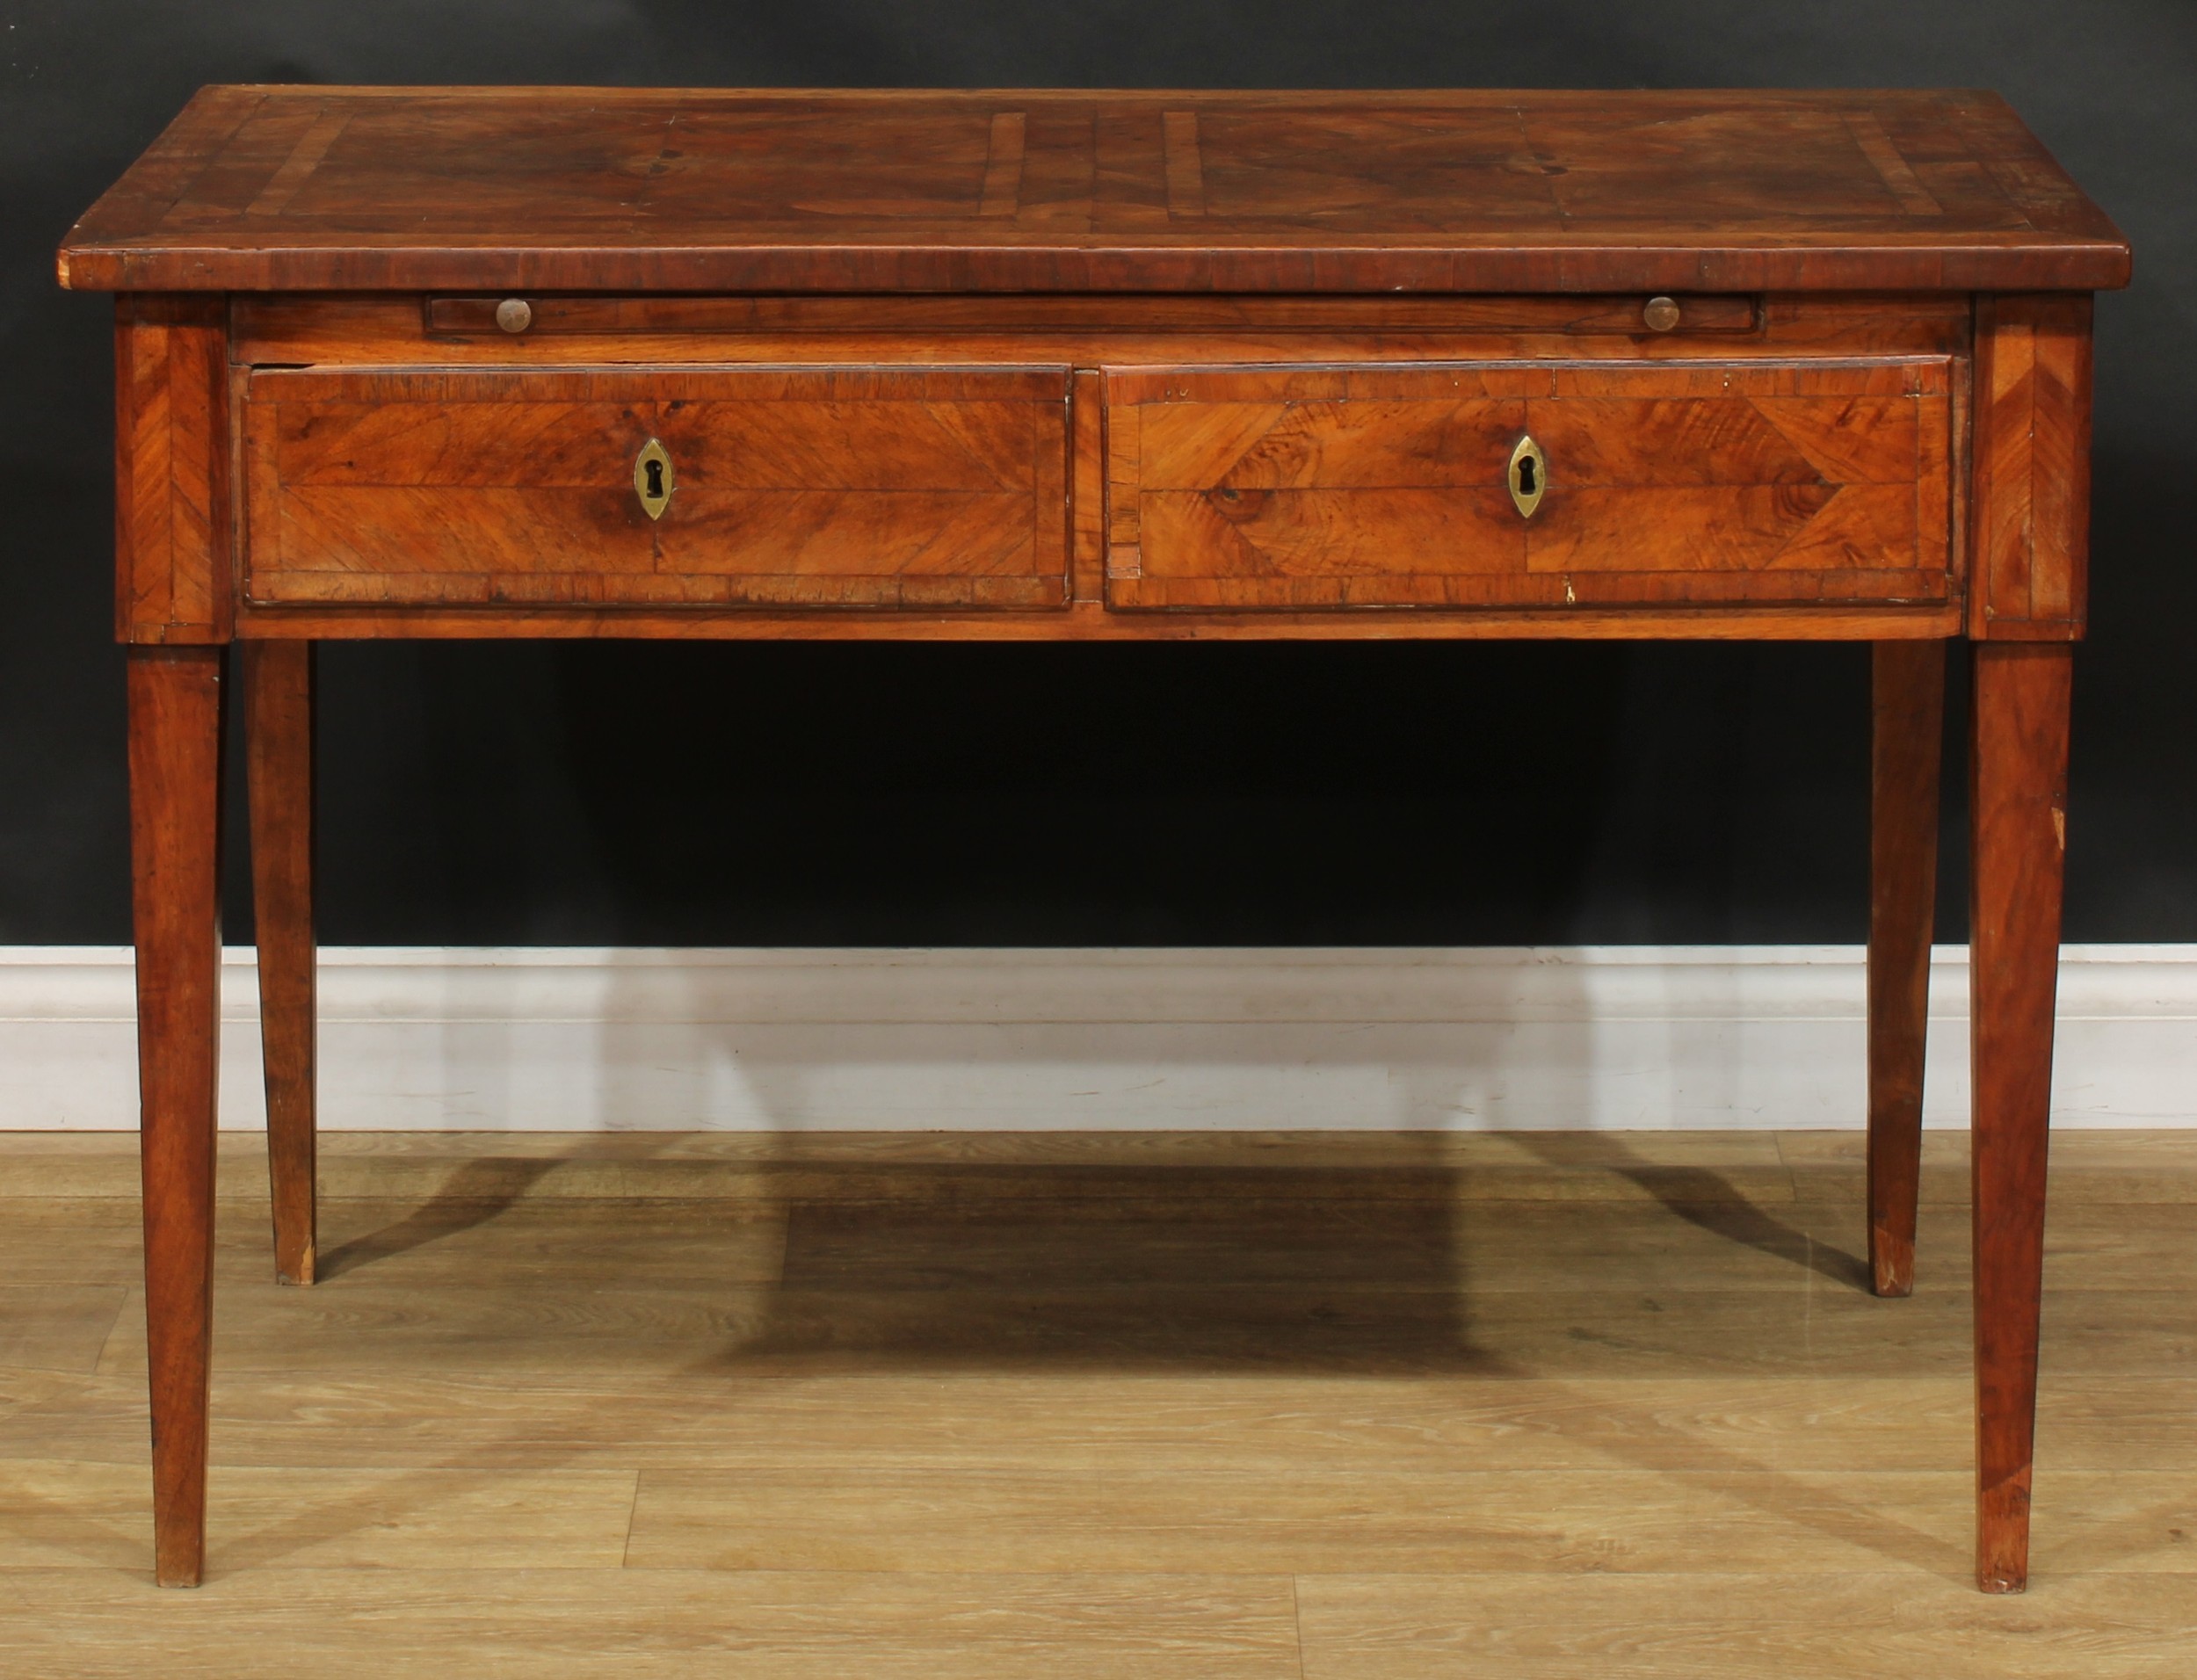 An 18th century French Provincial side table, rectangular top with geometric parquetry veneers, - Image 2 of 7